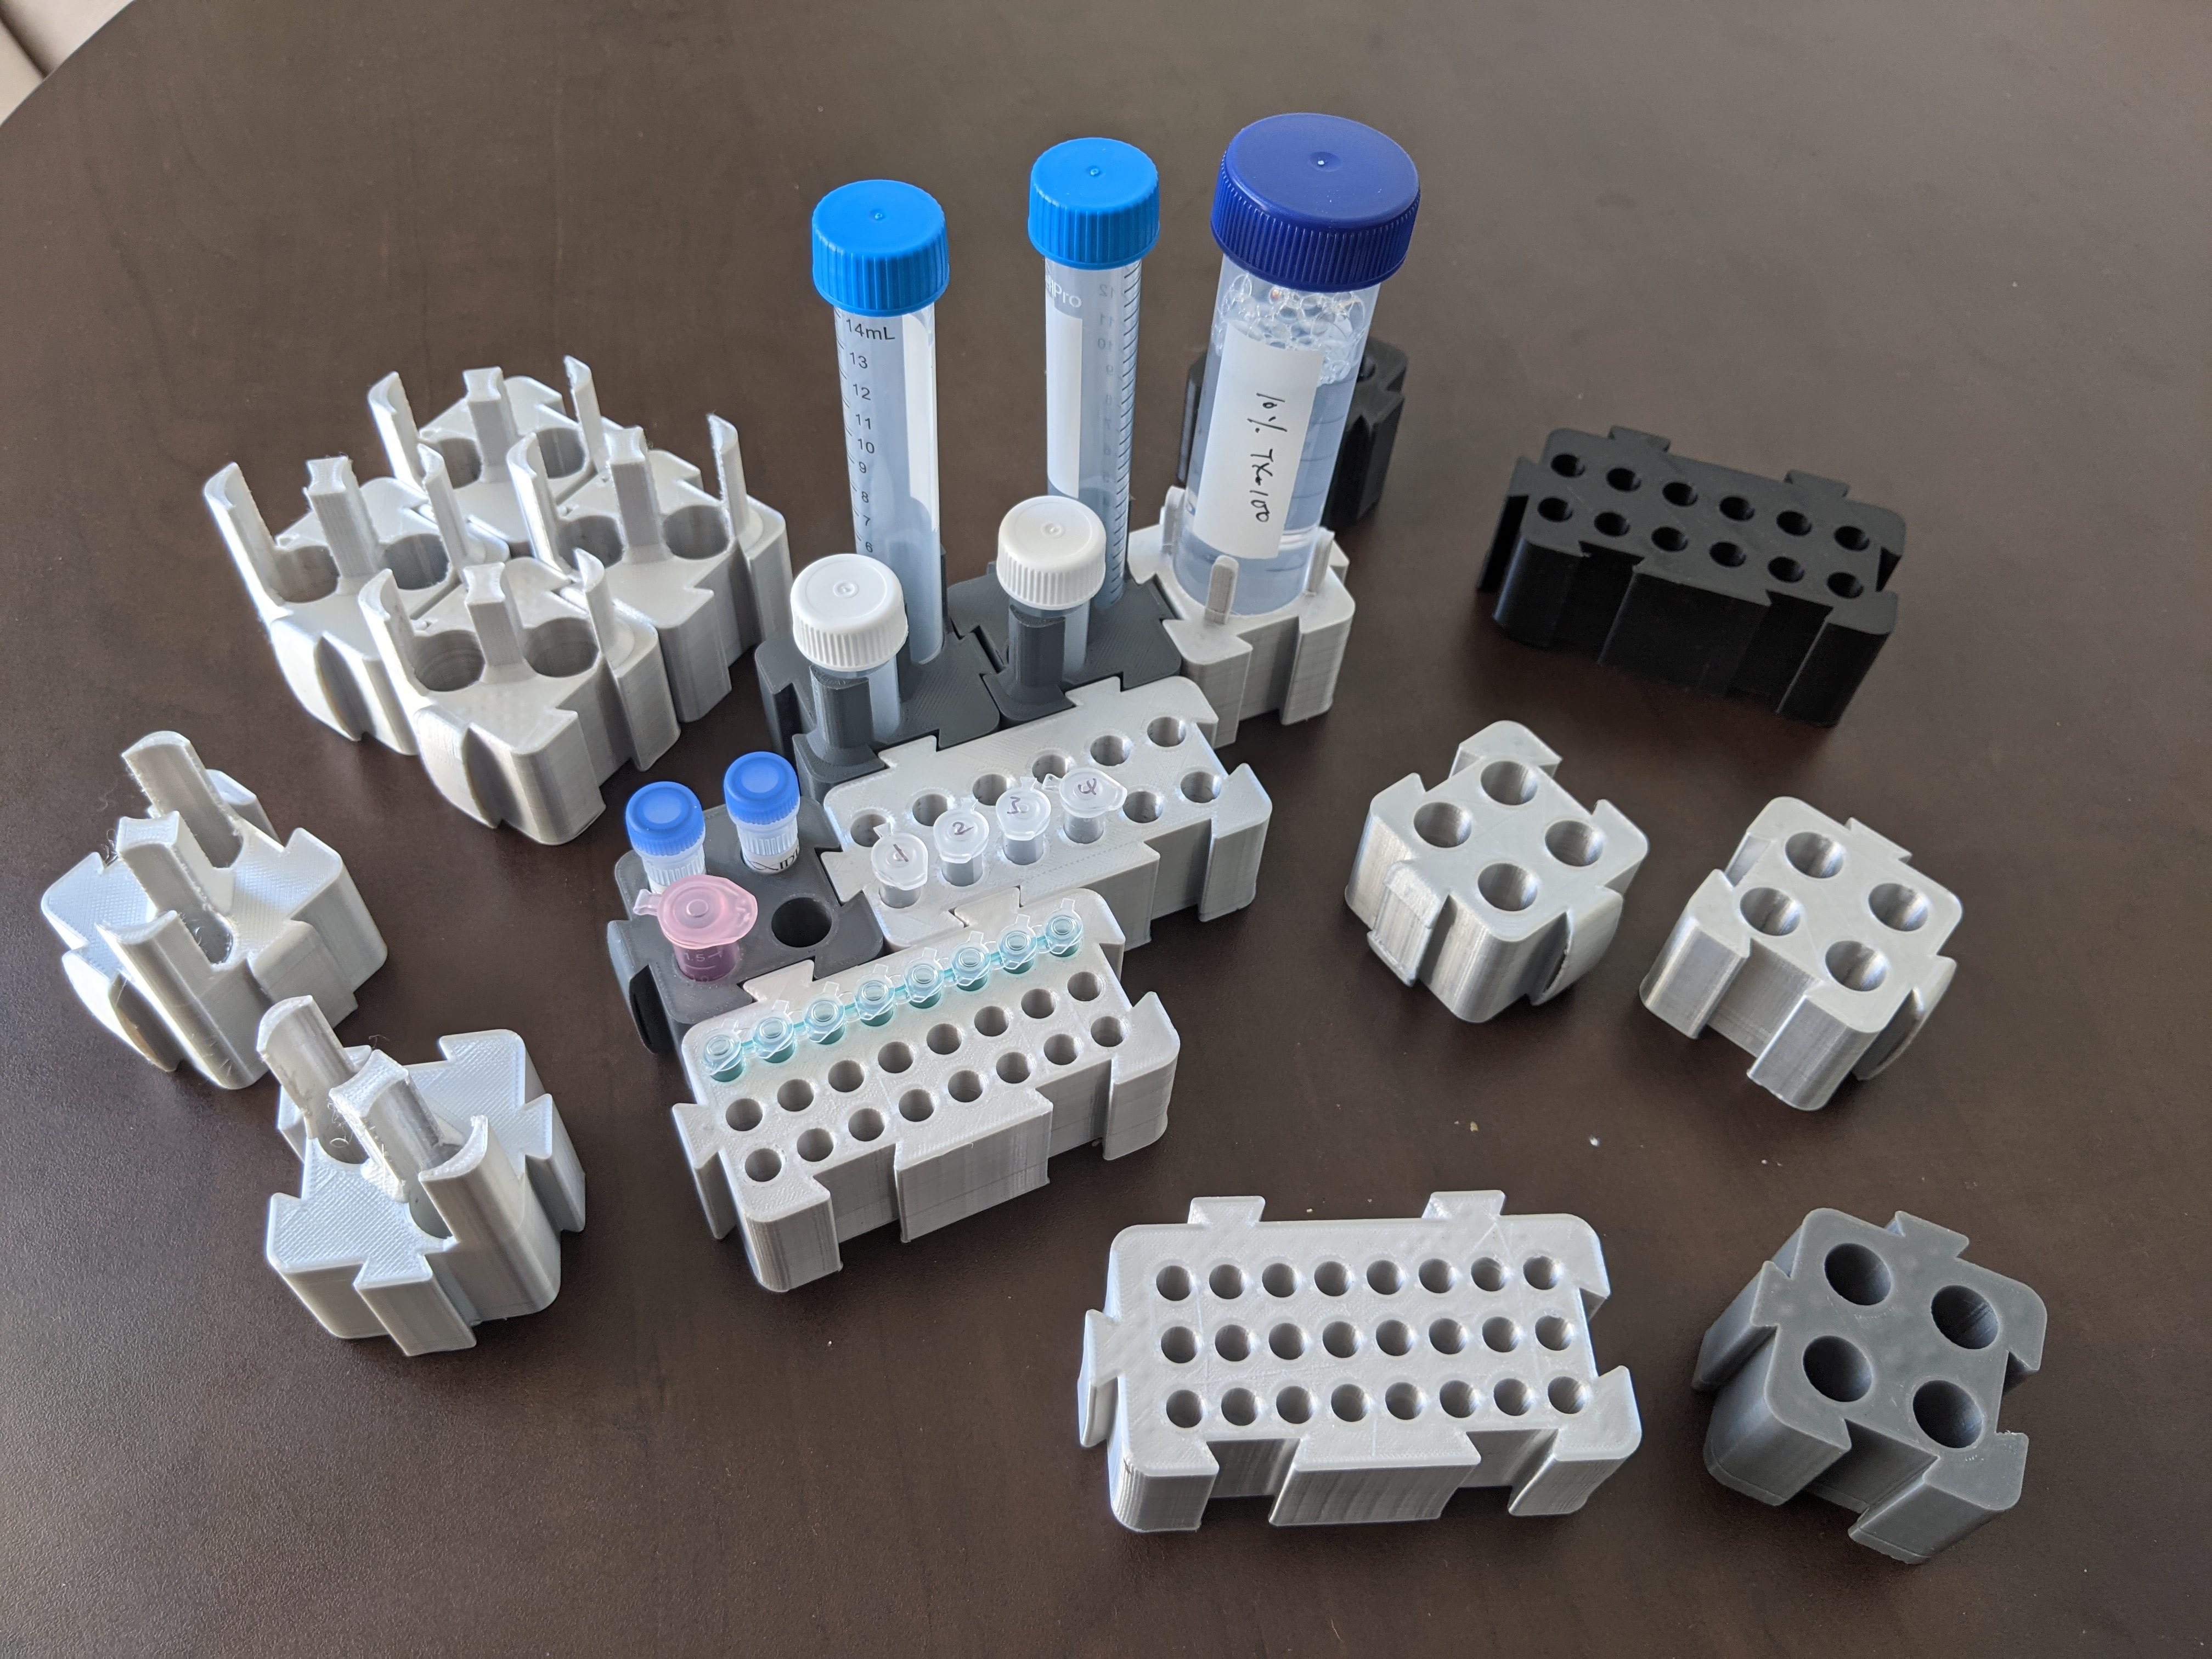 Modularized tube racks that can be freely arranged based on needs with the spring dovetail design for easy assembly and disassembly.